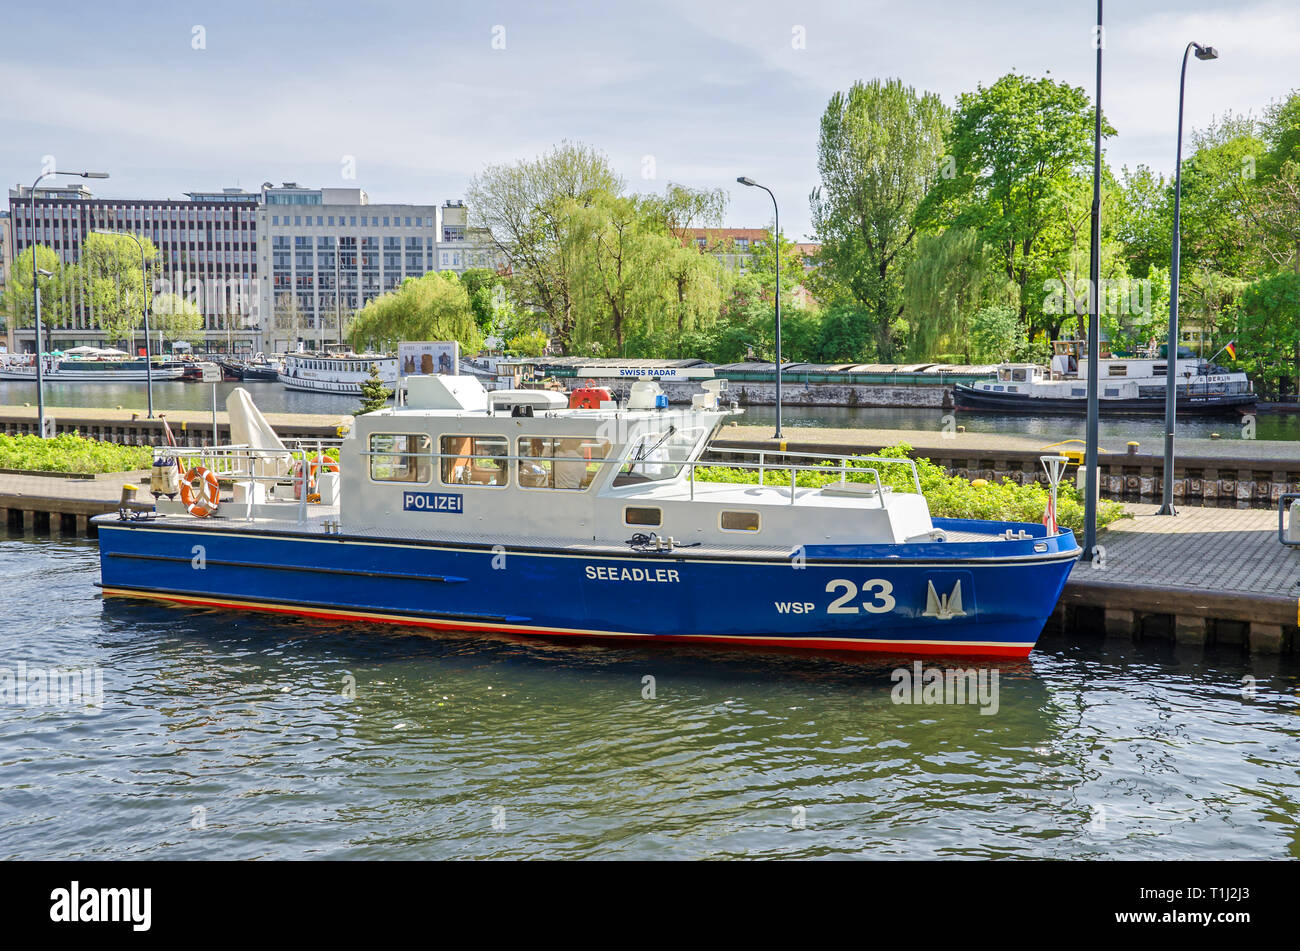 Berlin, Germany - April 22, 2018: Water guard police boat entering the Multi-chamber Muehlendamm locks in the central Mitte district Stock Photo